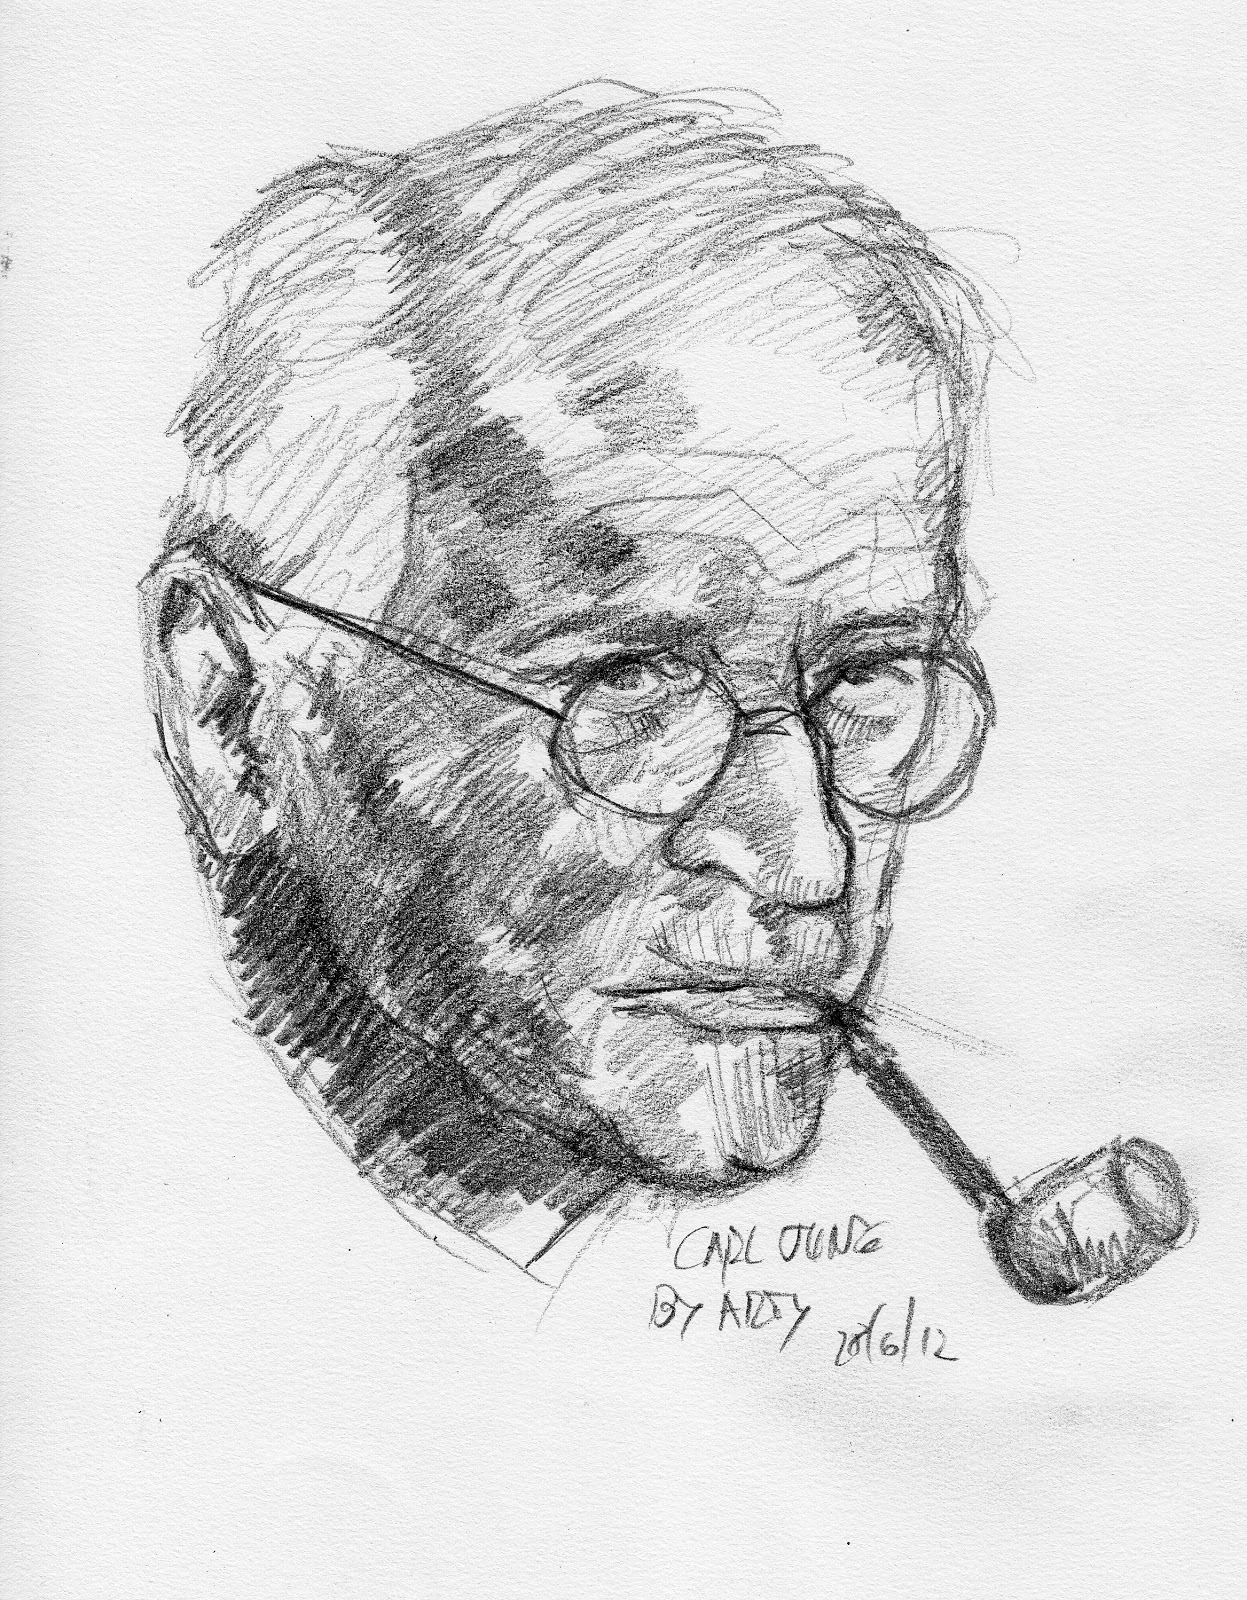 This is a black and white sketch of Carl Jung. Only Jung's face is pictured in the drawing. He is wearing eye glasses and has a tobacco pipe in his mouth.